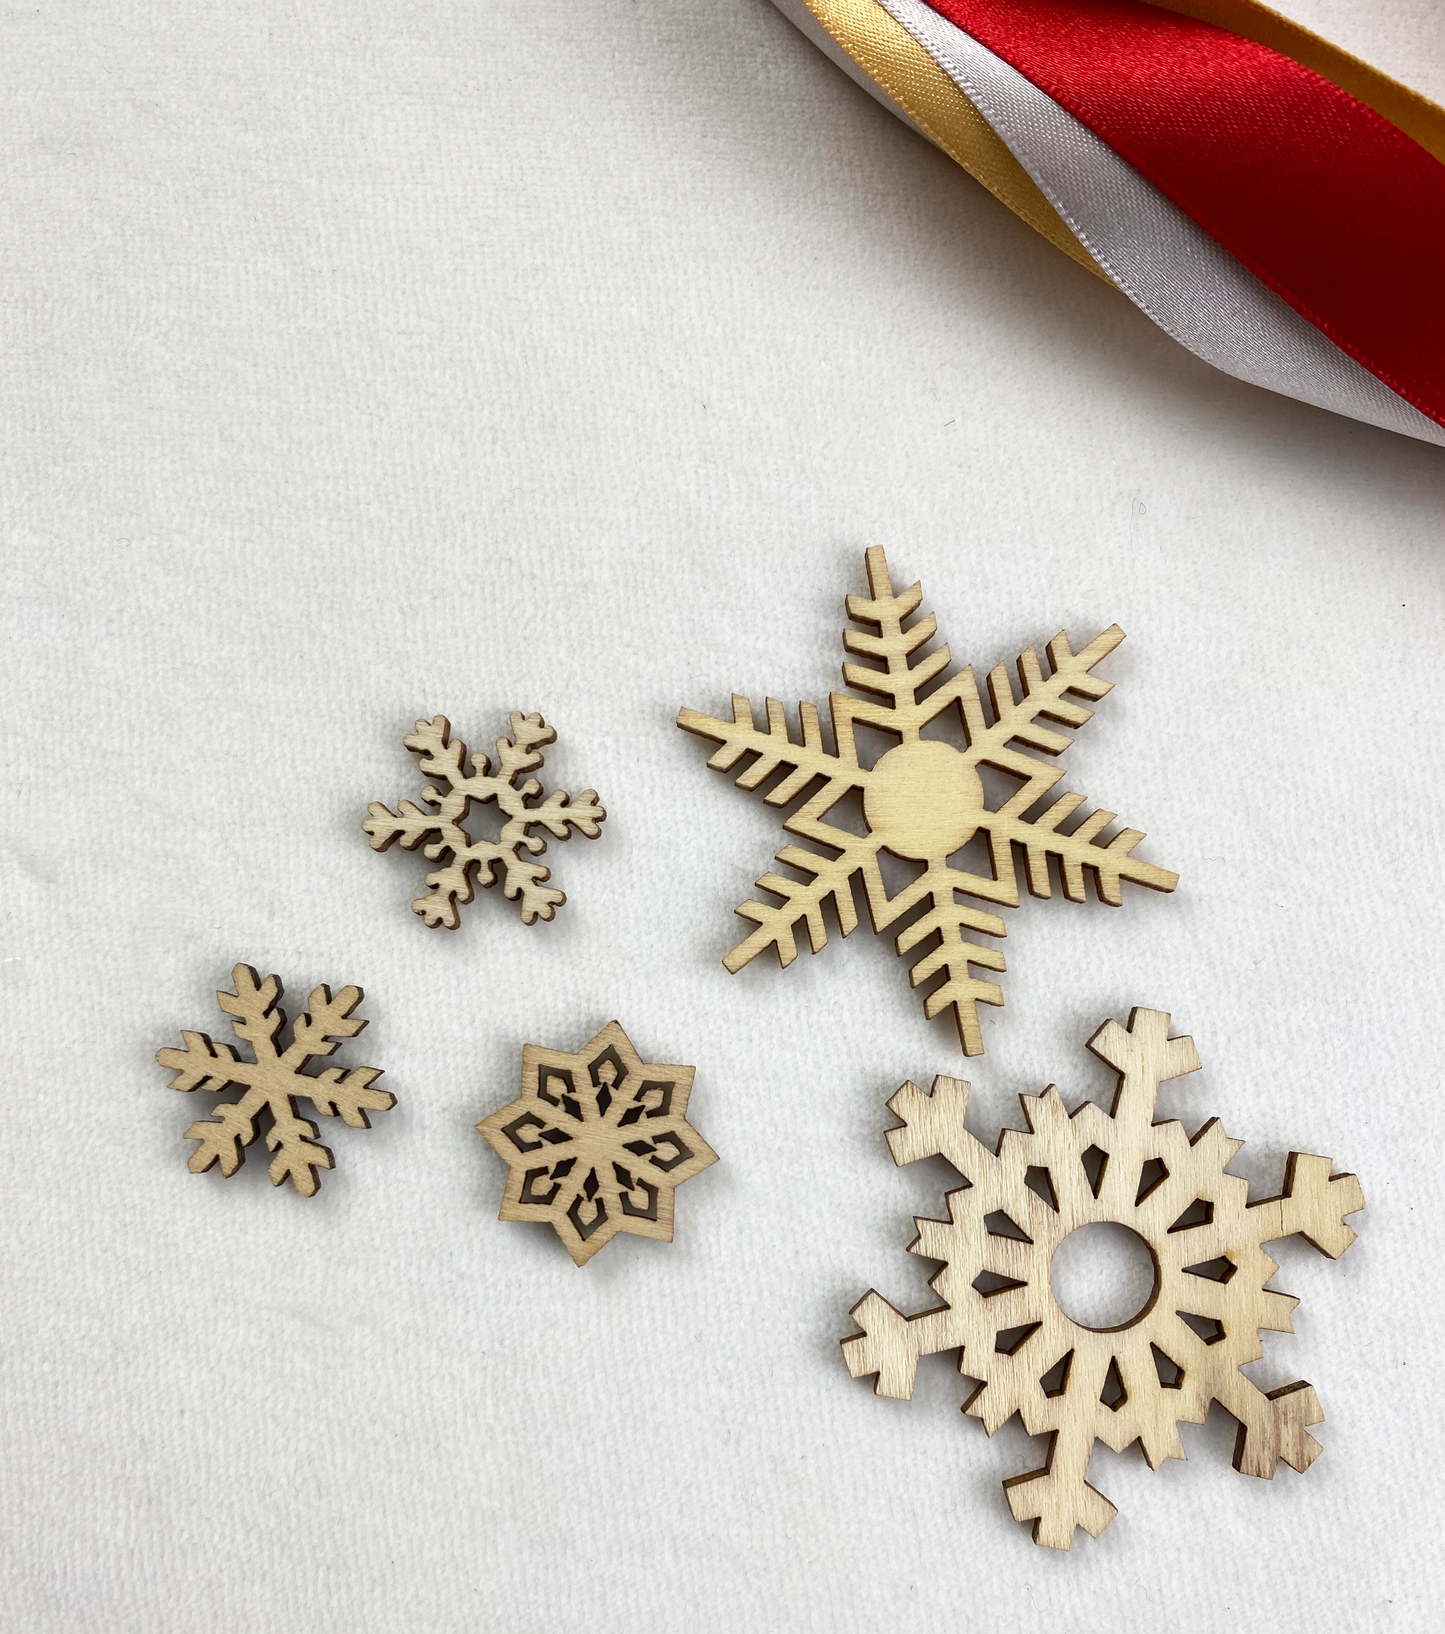 Recycled Ribbons and Wooden Snowflakes set